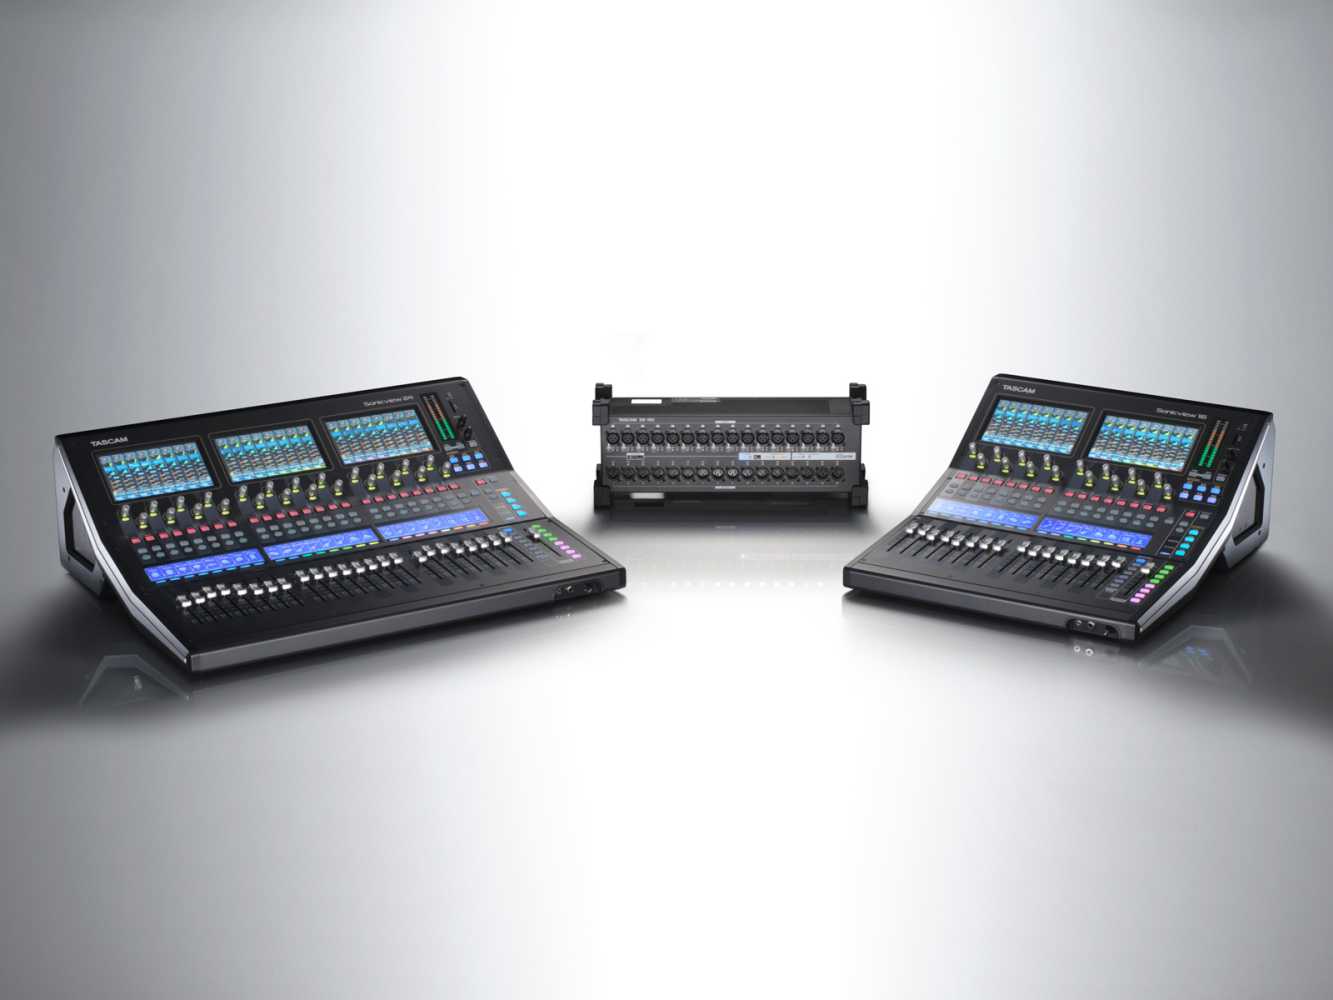 Sonicview consoles incorporate the latest technology and a new multi-screen user interface called VIEW